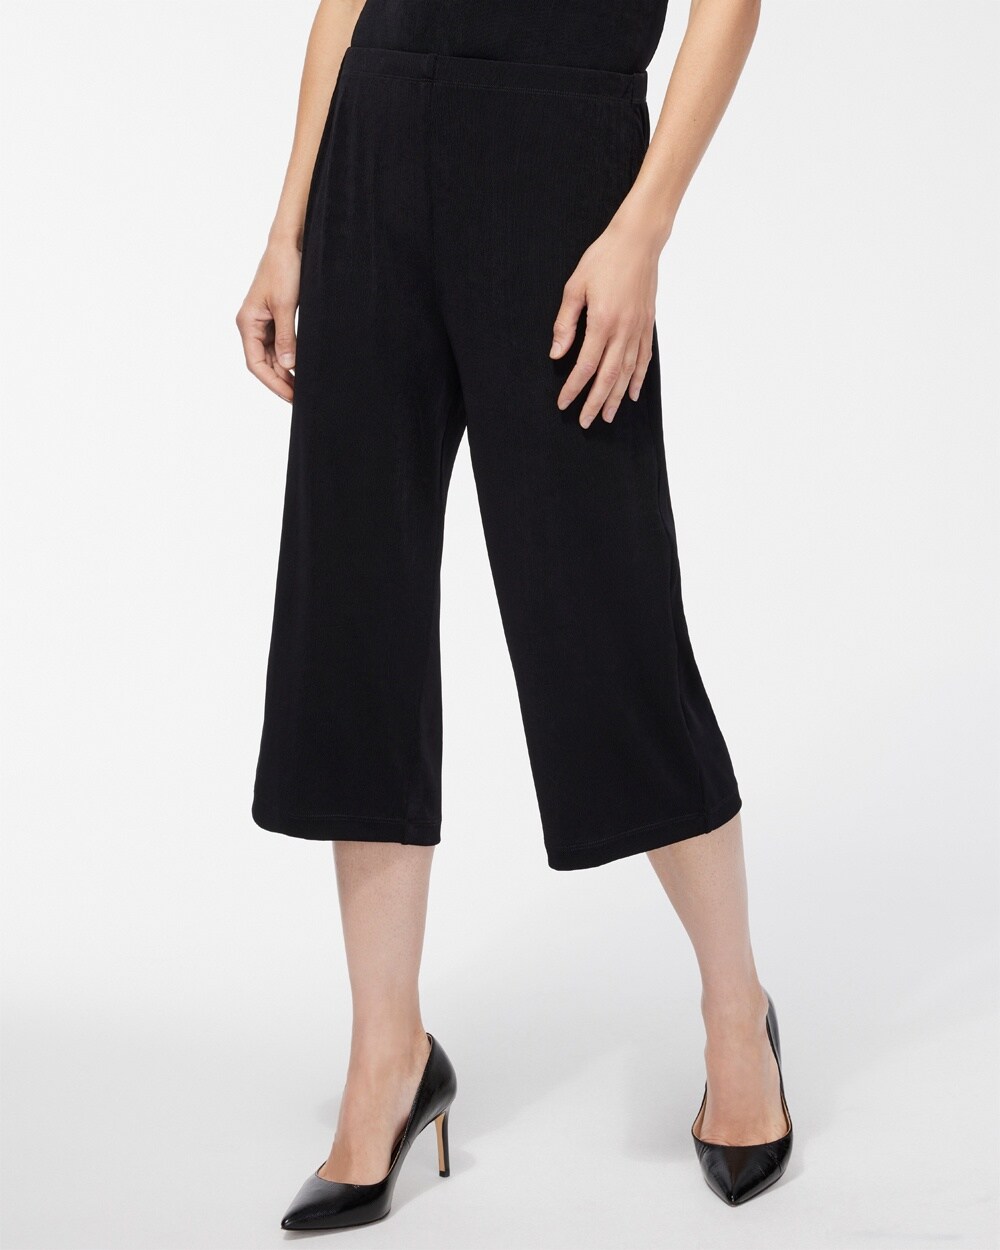 Travelers Classic Meredith Cropped Pants